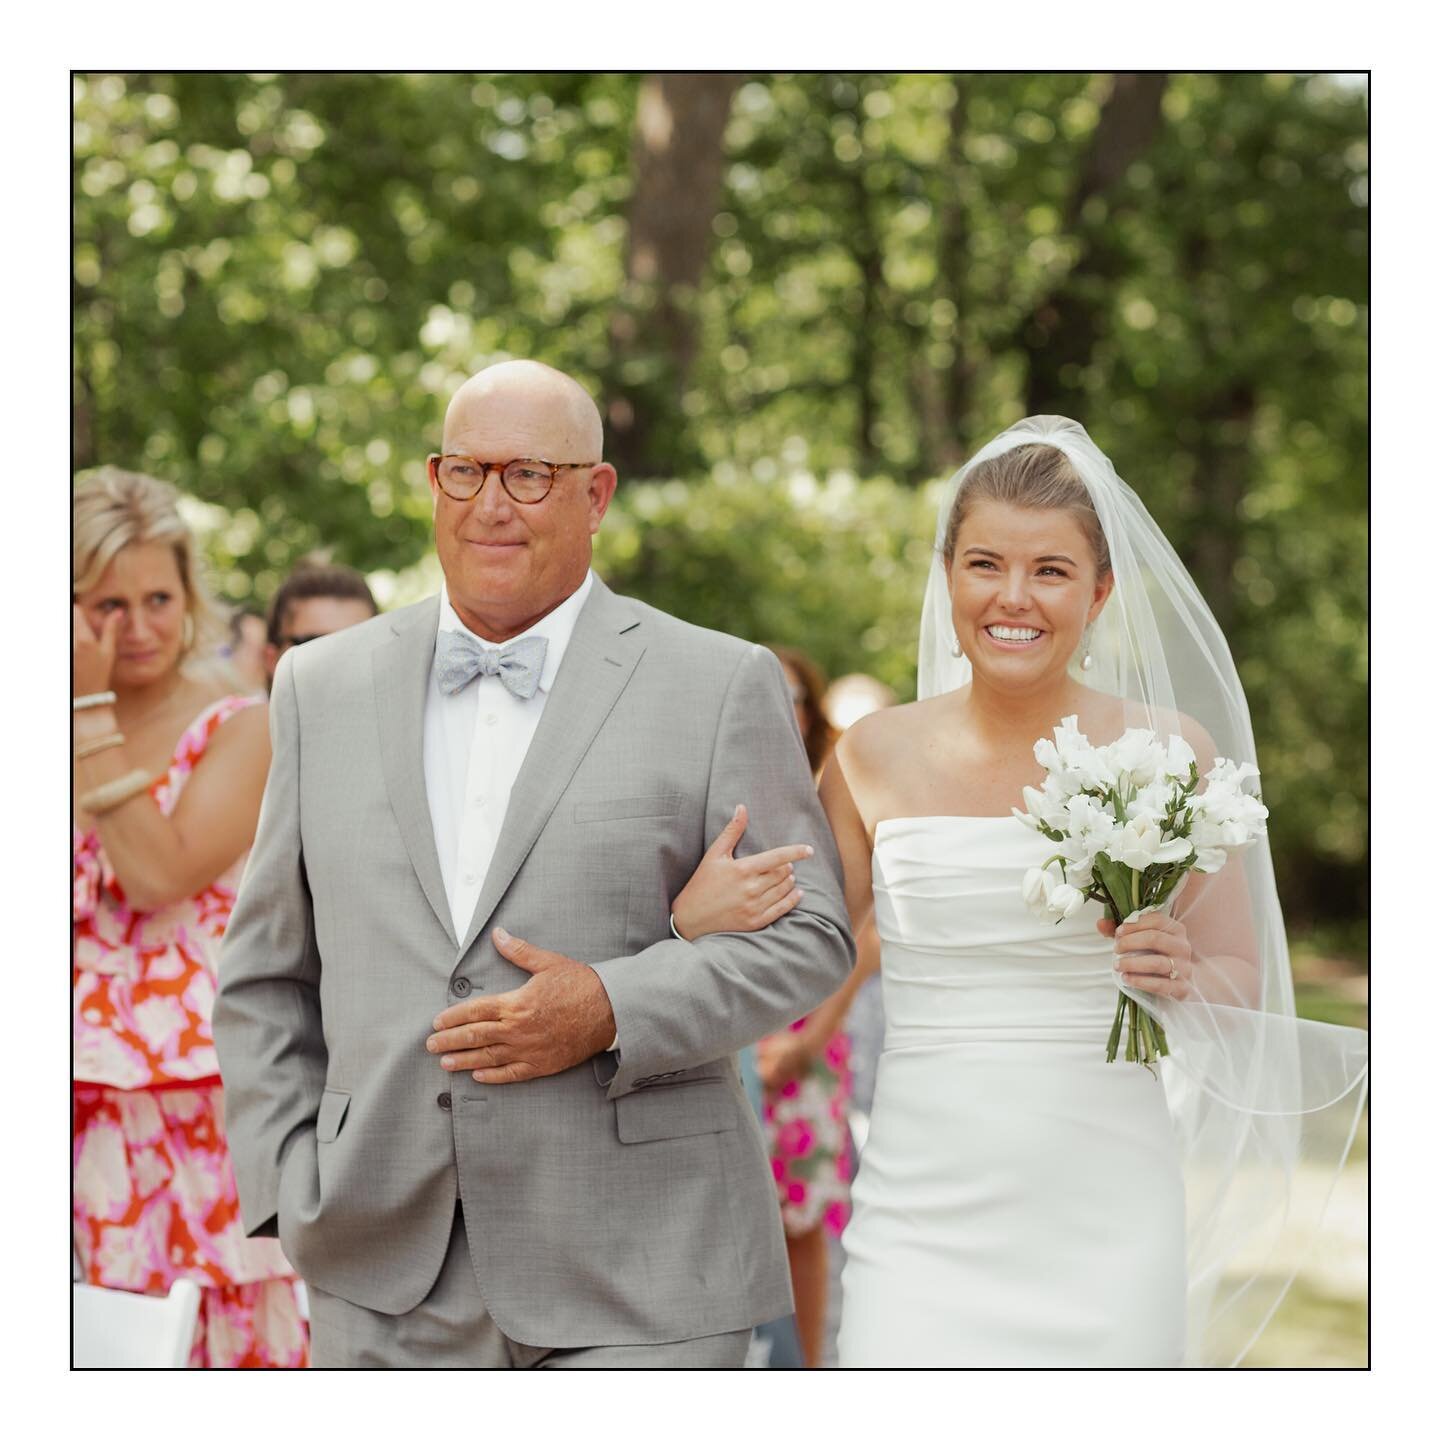 Whenever you decide to do the first look, it&rsquo;s a moment you&rsquo;ll never forget 

First Look for Anne + Kevin
Victoria, Minnesota 

Planner | @honeyhill_weddings 
Bridal | @robertbullockbride 
Florals | Creations of Alexandria 
Groom | @atmos